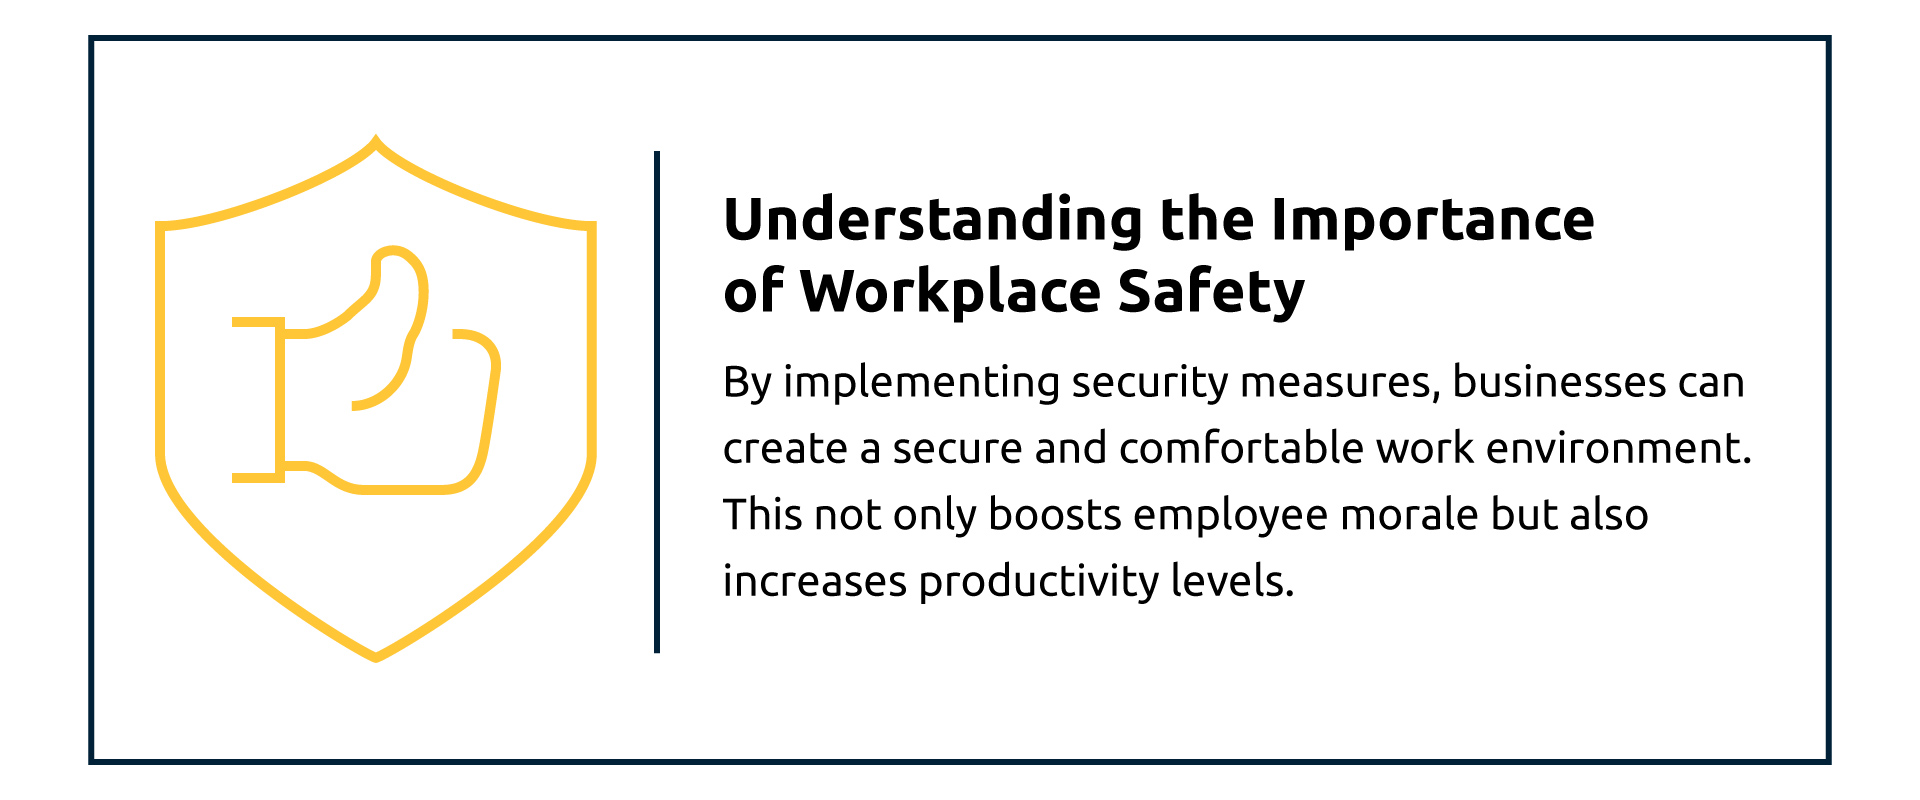 Understanding the Importance of Workplace Safety